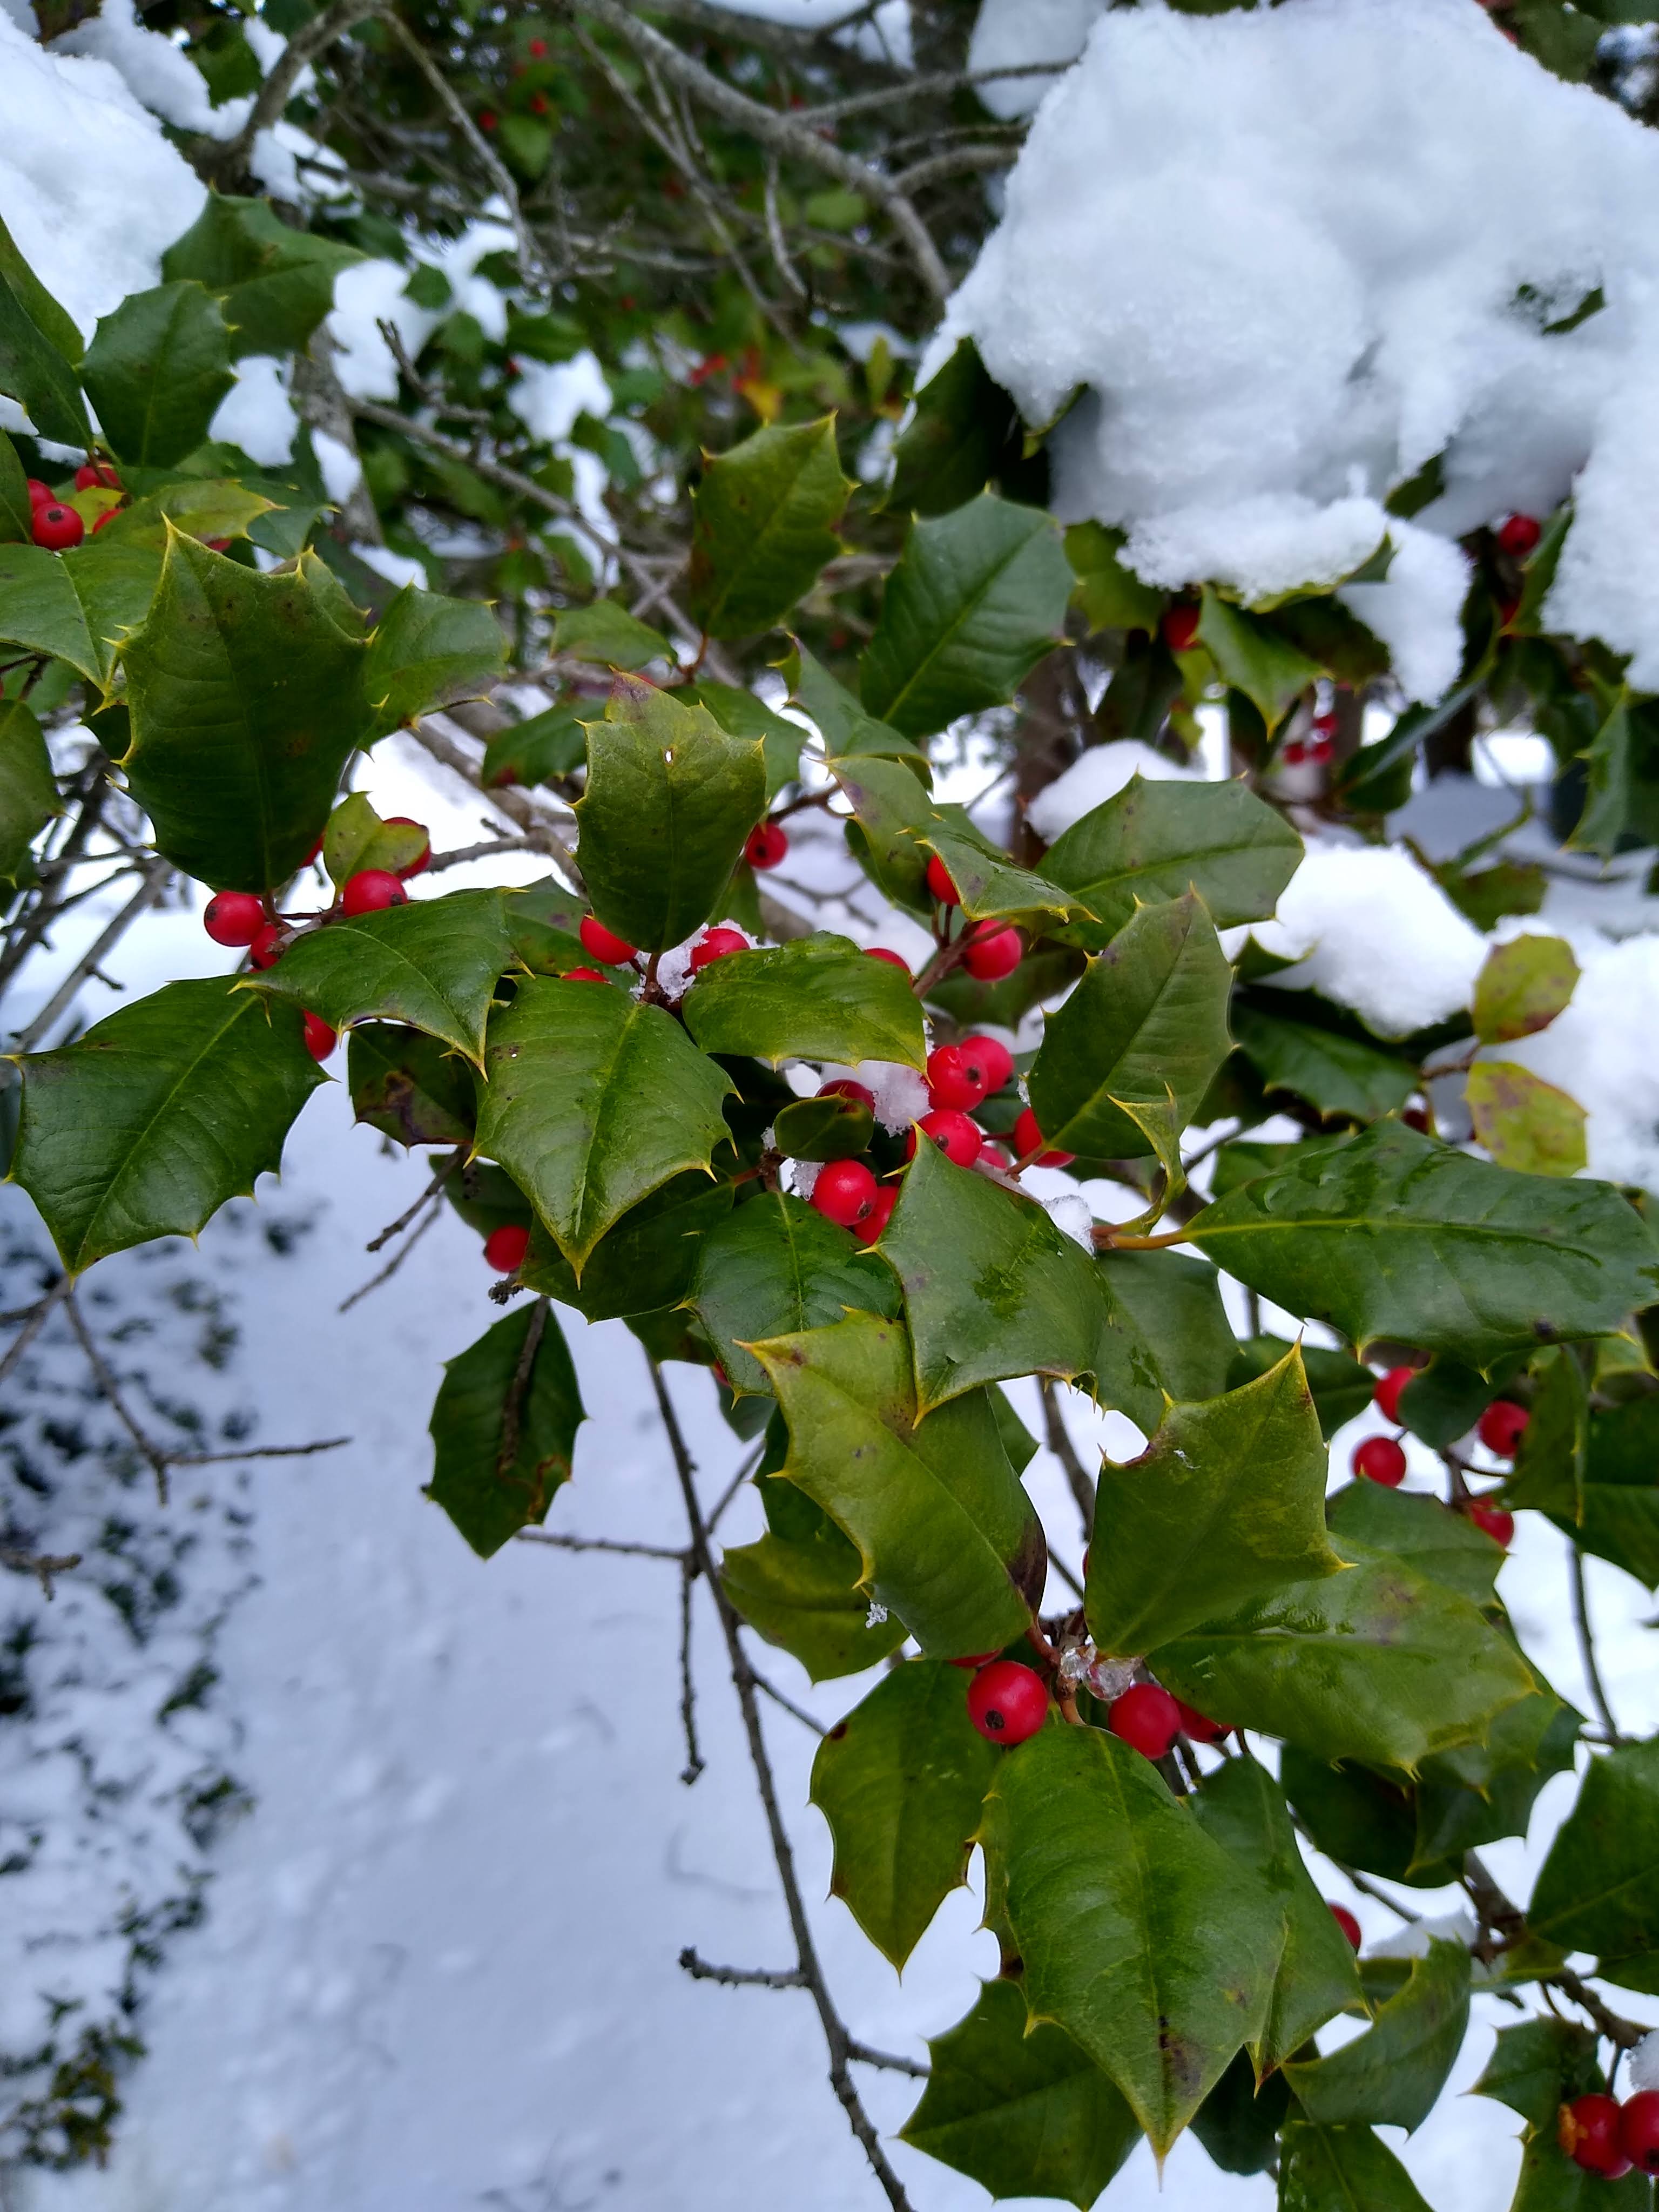 Holly branch with leaves and berries covered in snow